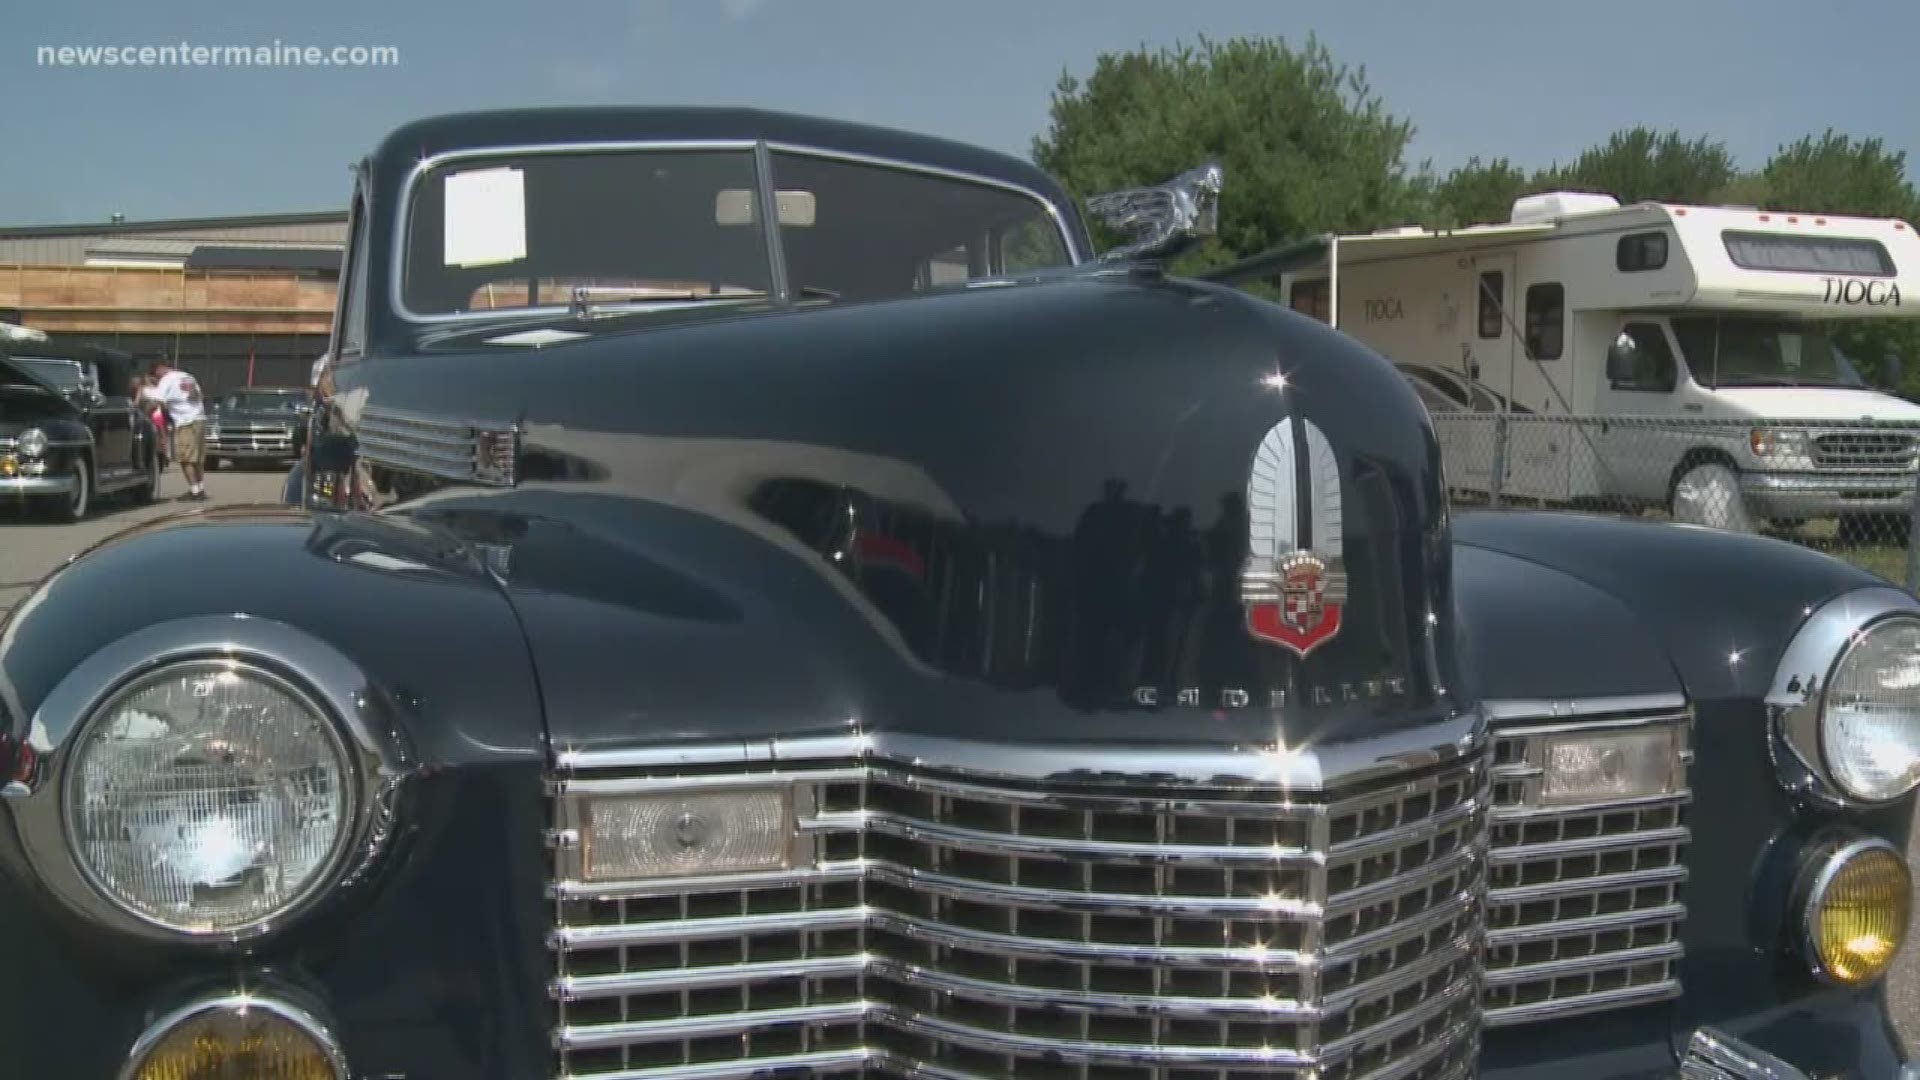 Classic car auction has fans showing their love